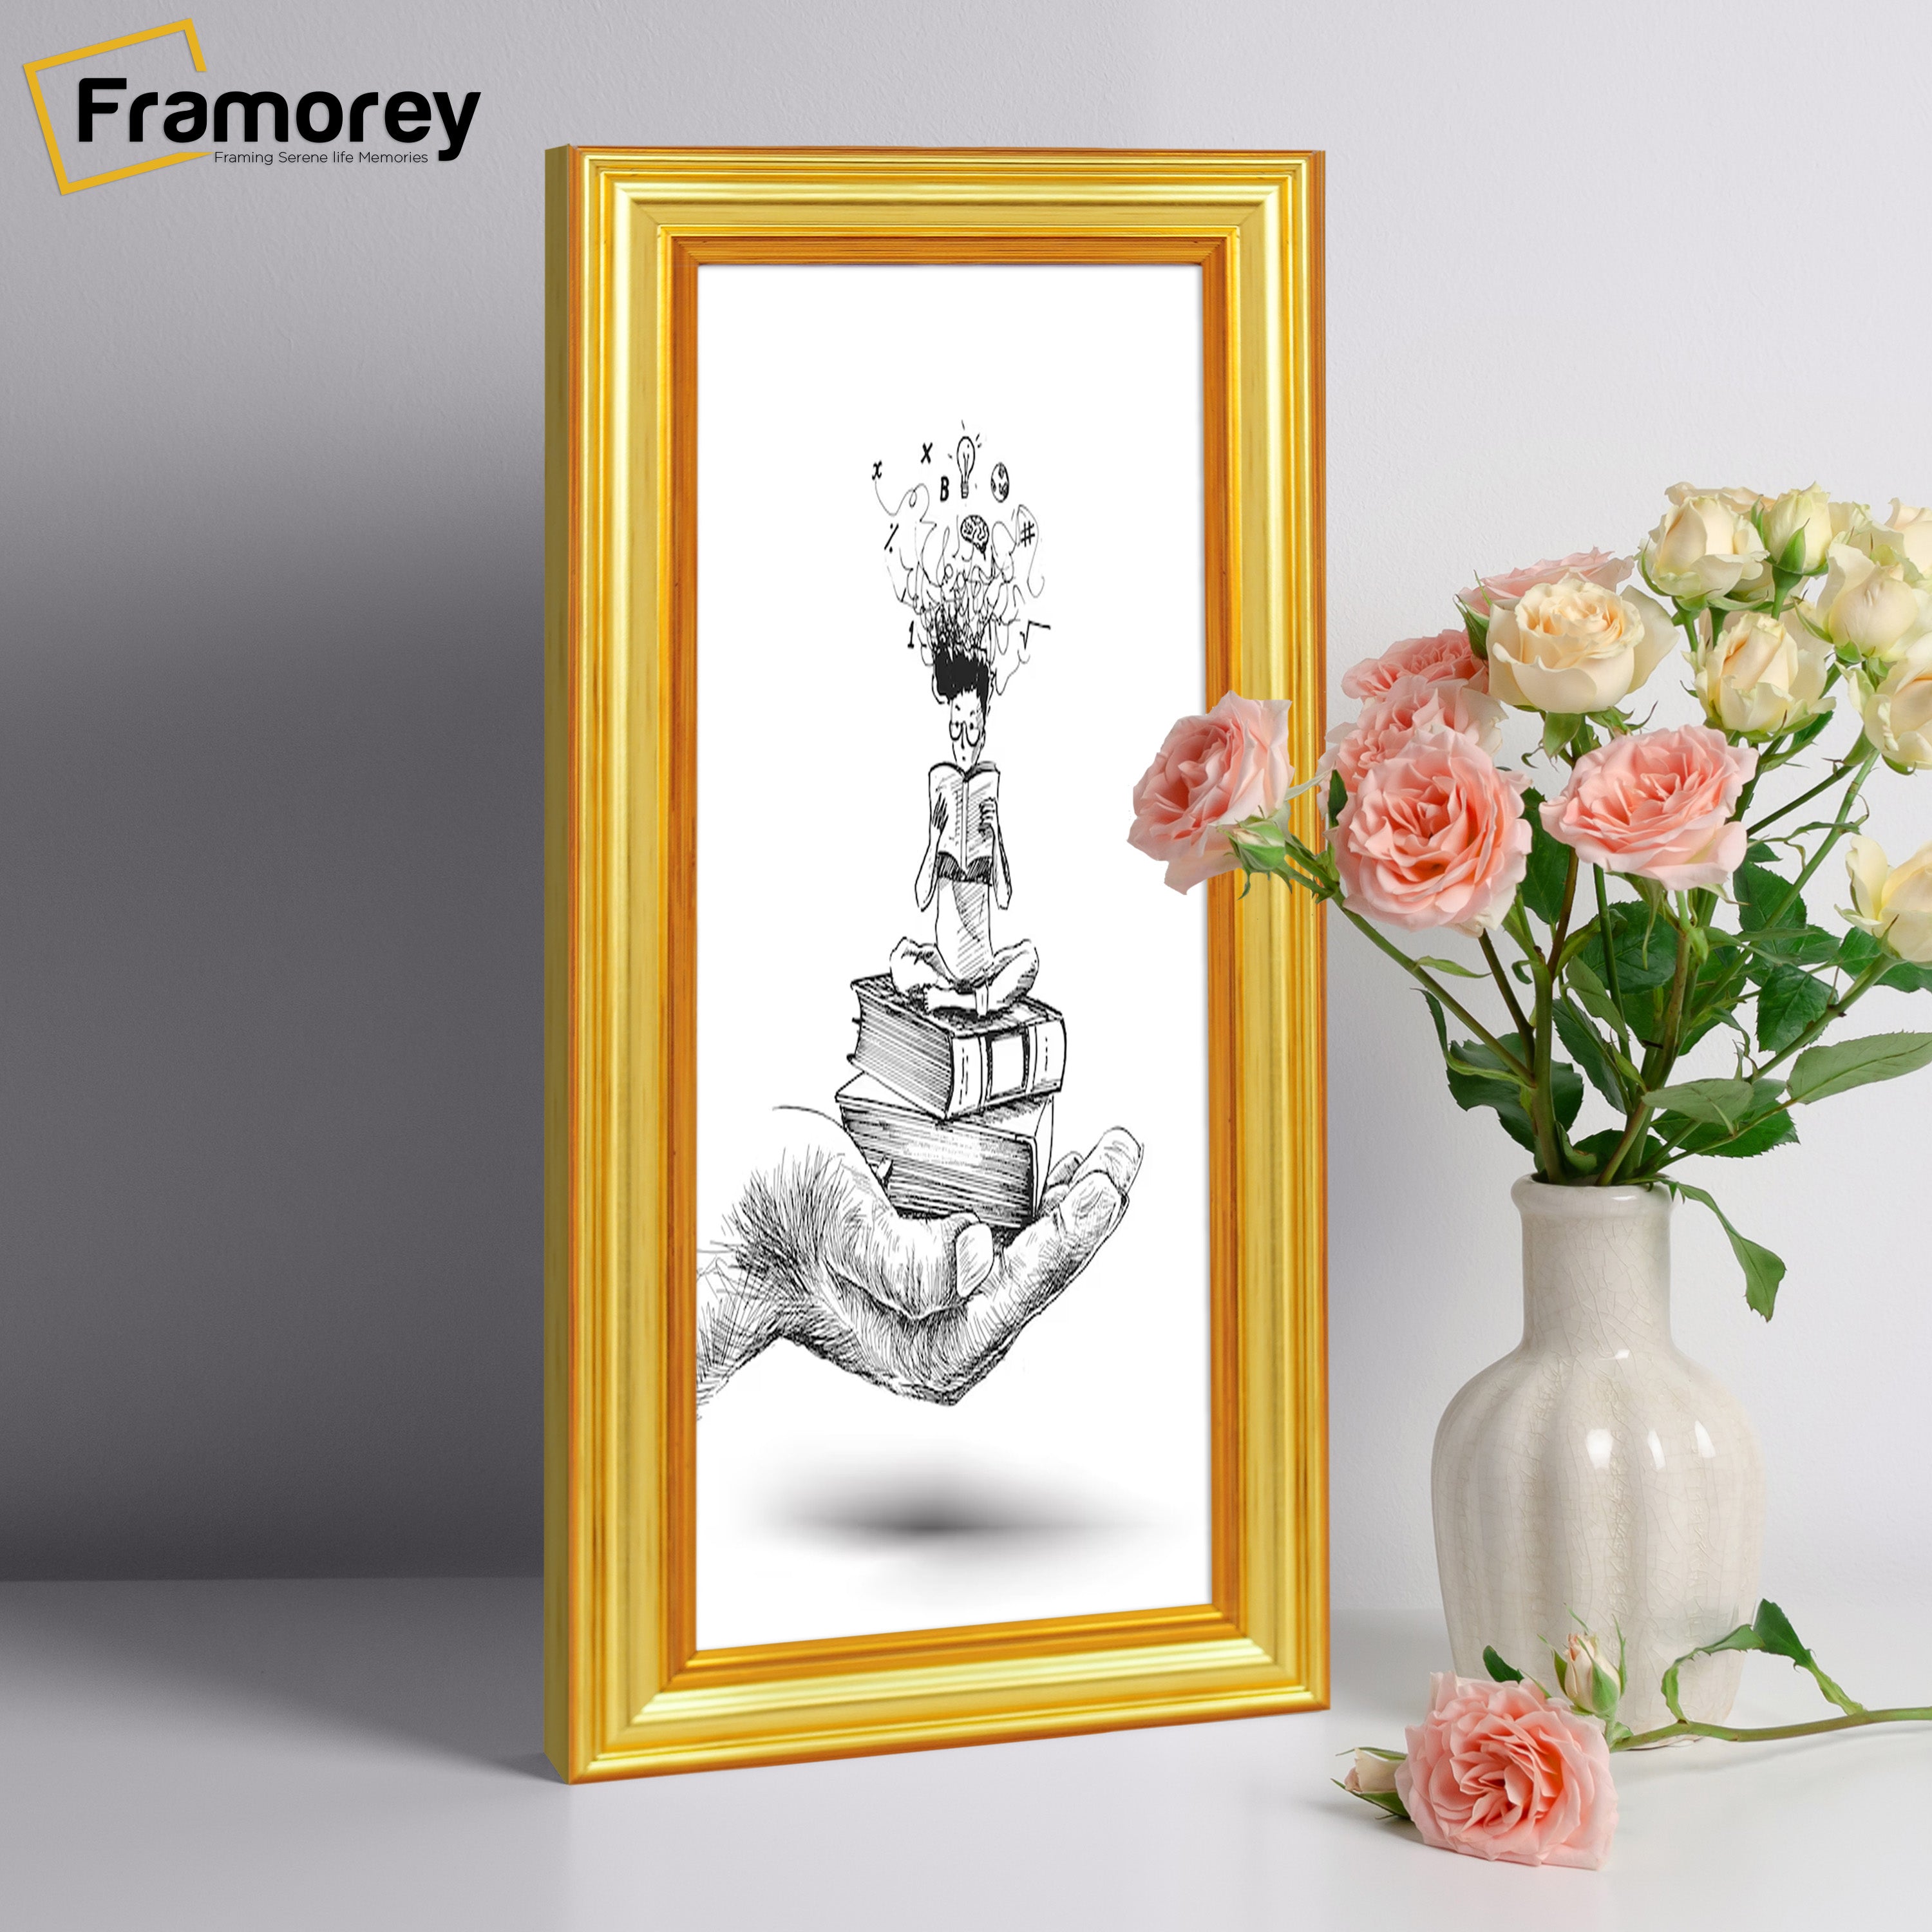 Panoramic Size Gold Picture Frames Handmade Wooden Effect Poster Frames